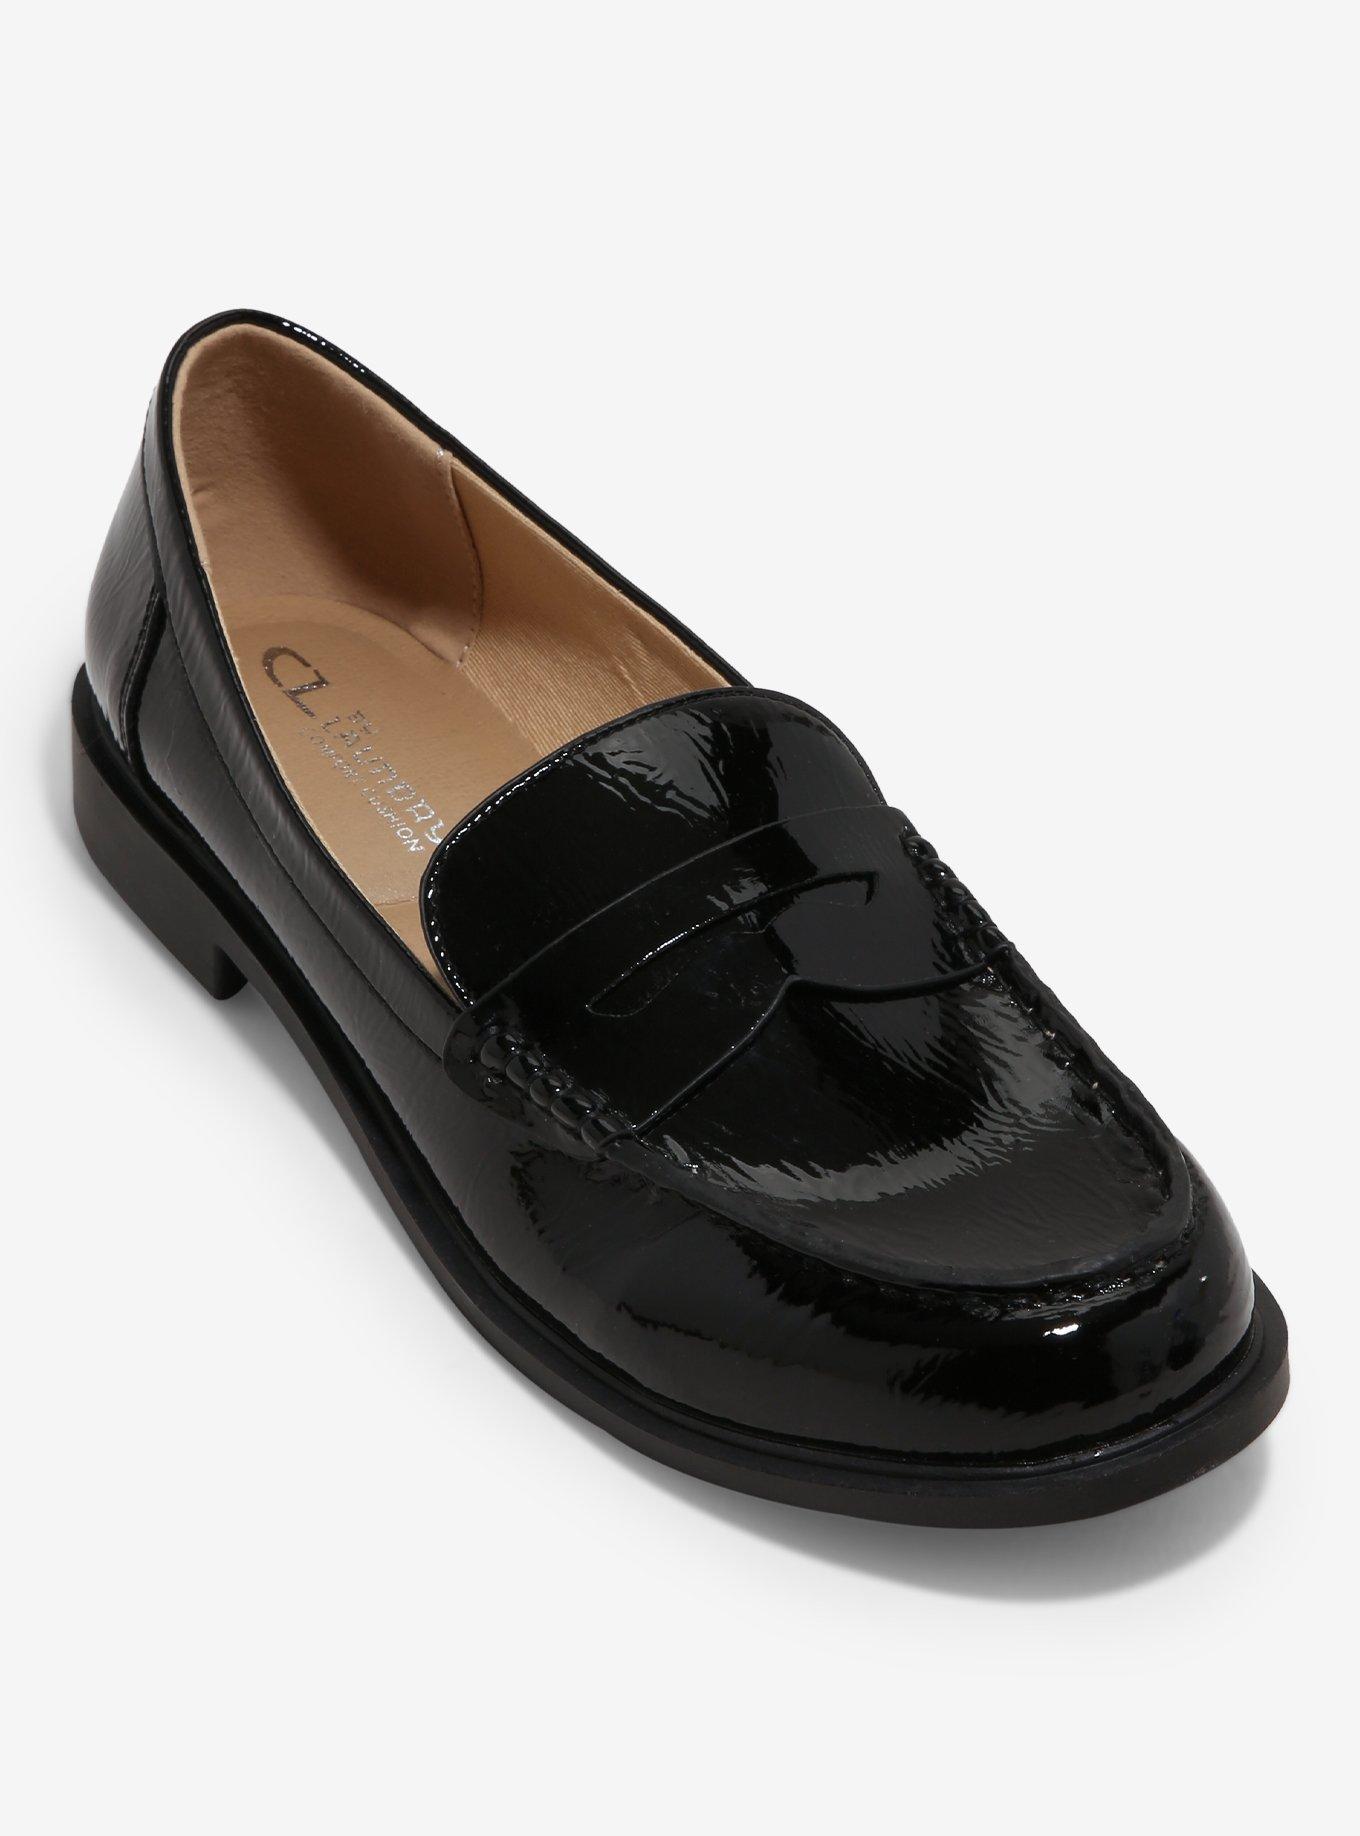 Chinese Laundry Black Patent Loafers, MULTI, hi-res